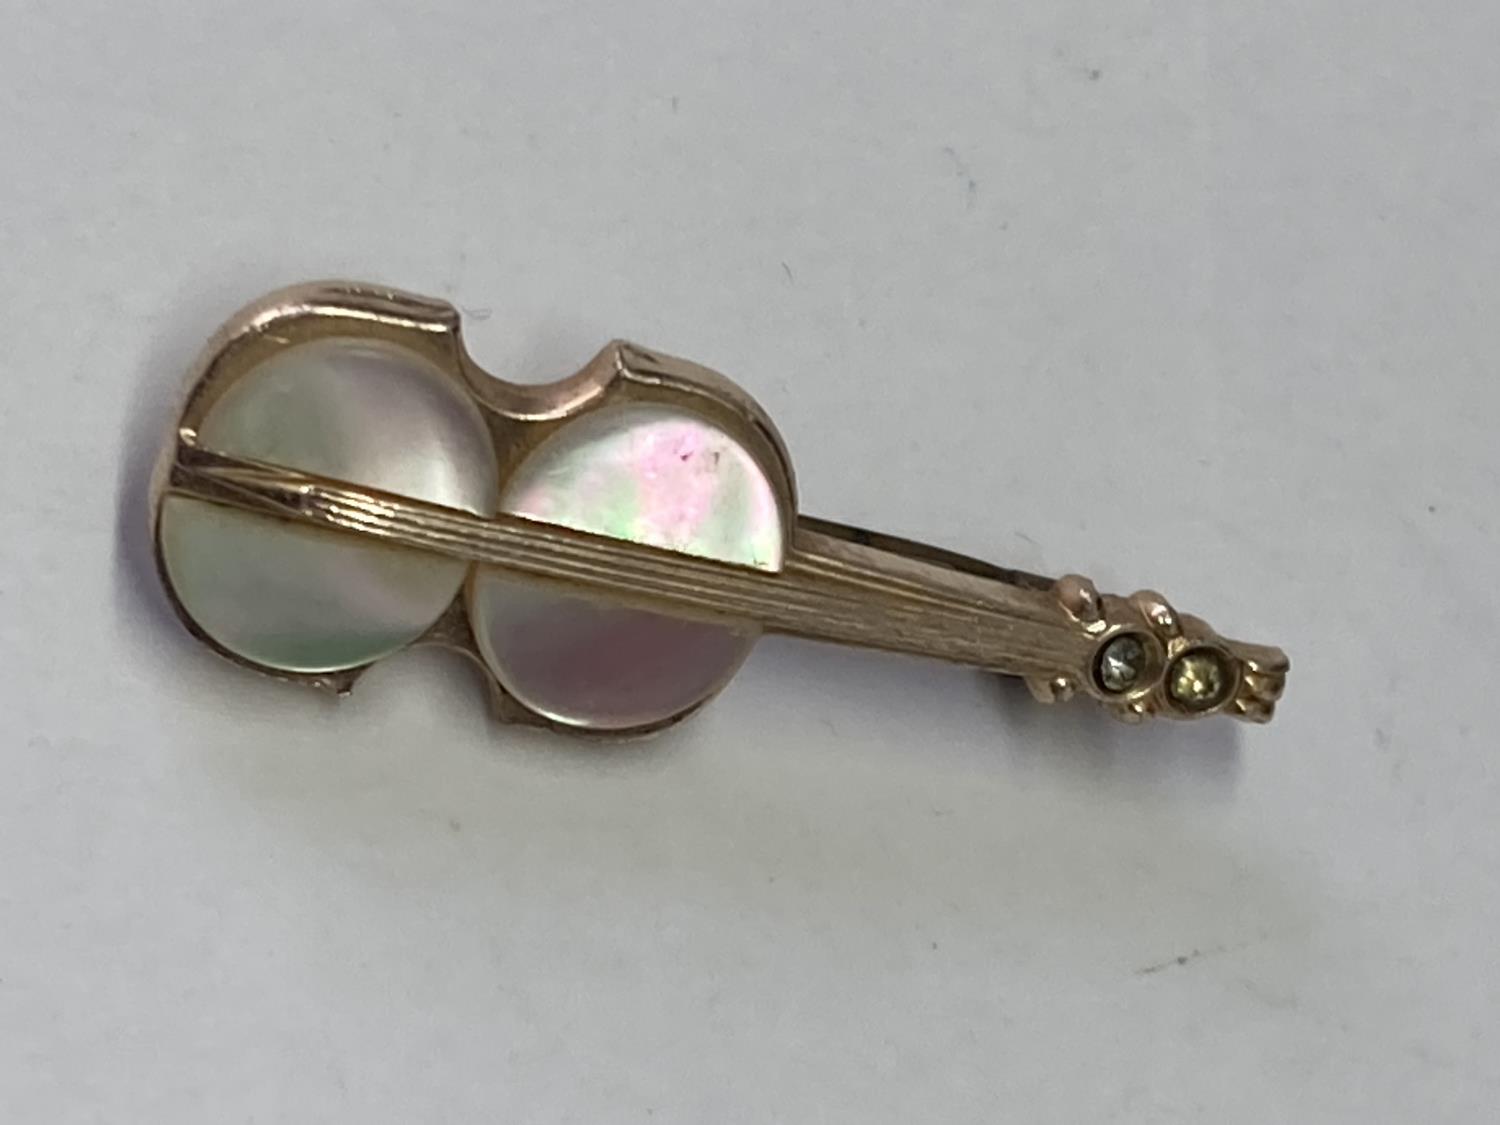 A RARE VINTAGE BEATLES GUITAR BROOCH AND A MOTHER OF PEARL EXAMPLE - Image 10 of 10